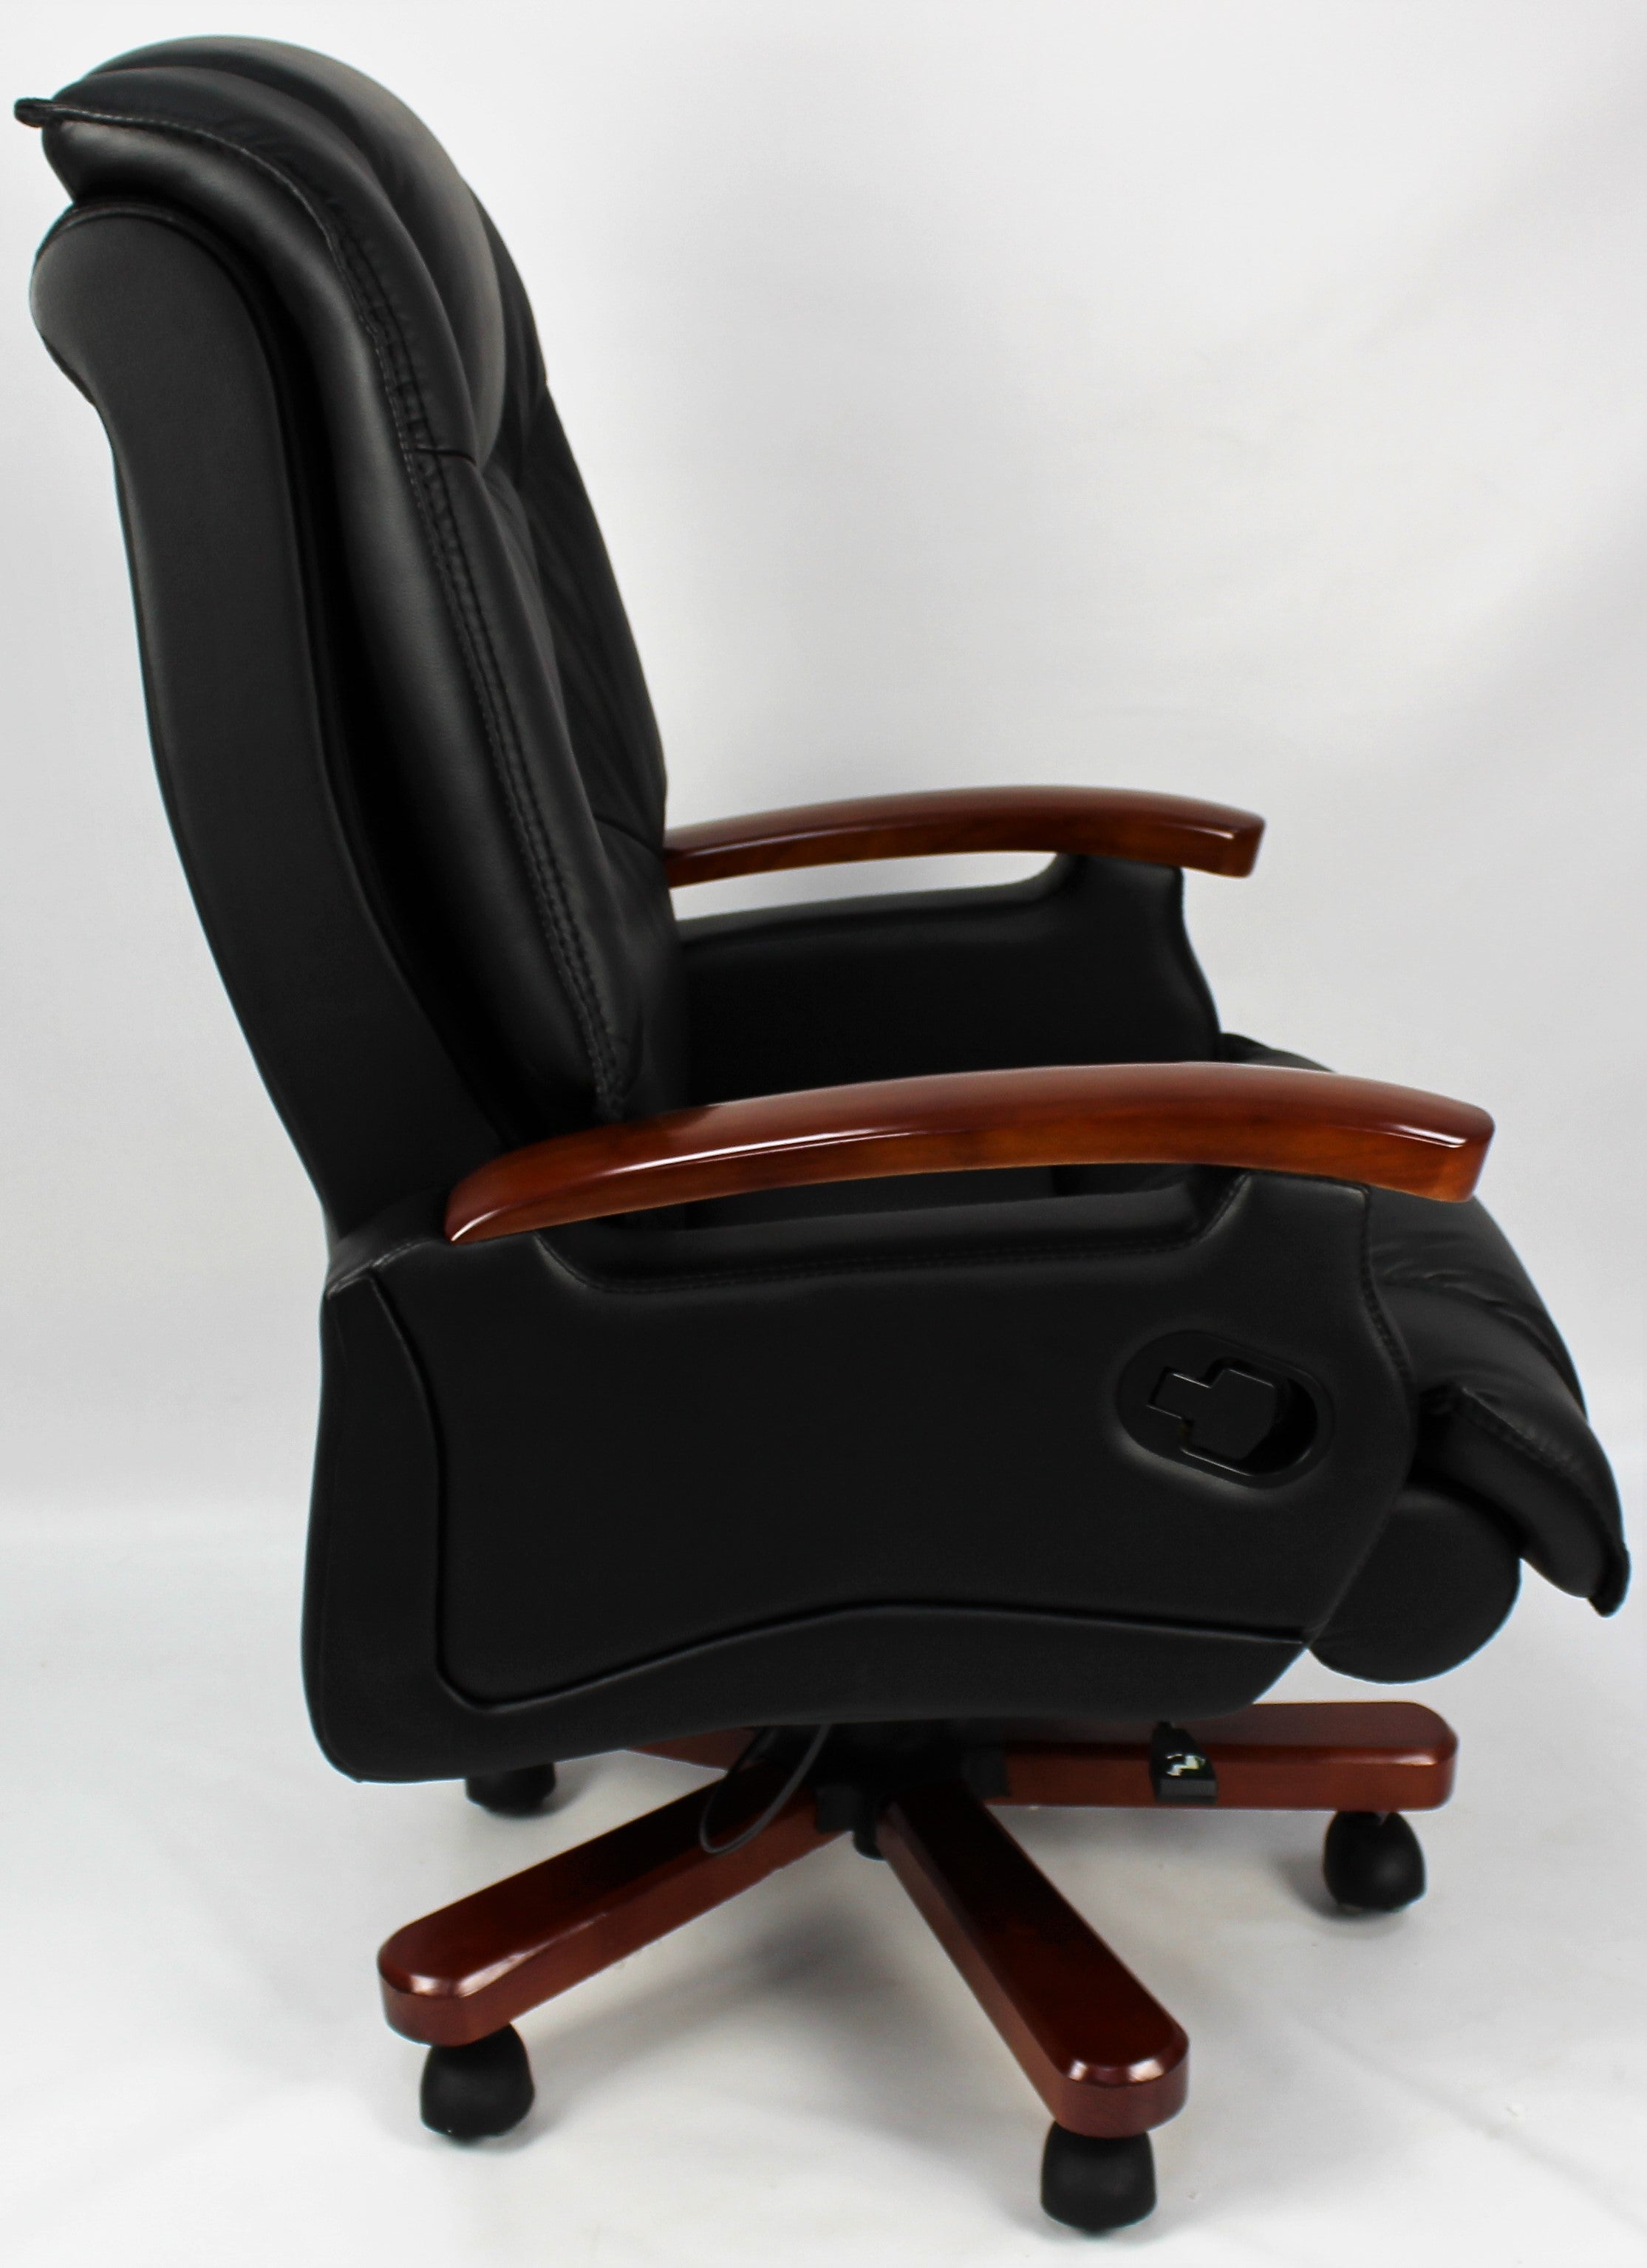 Luxury Black Leather Executive Office Chair - A302